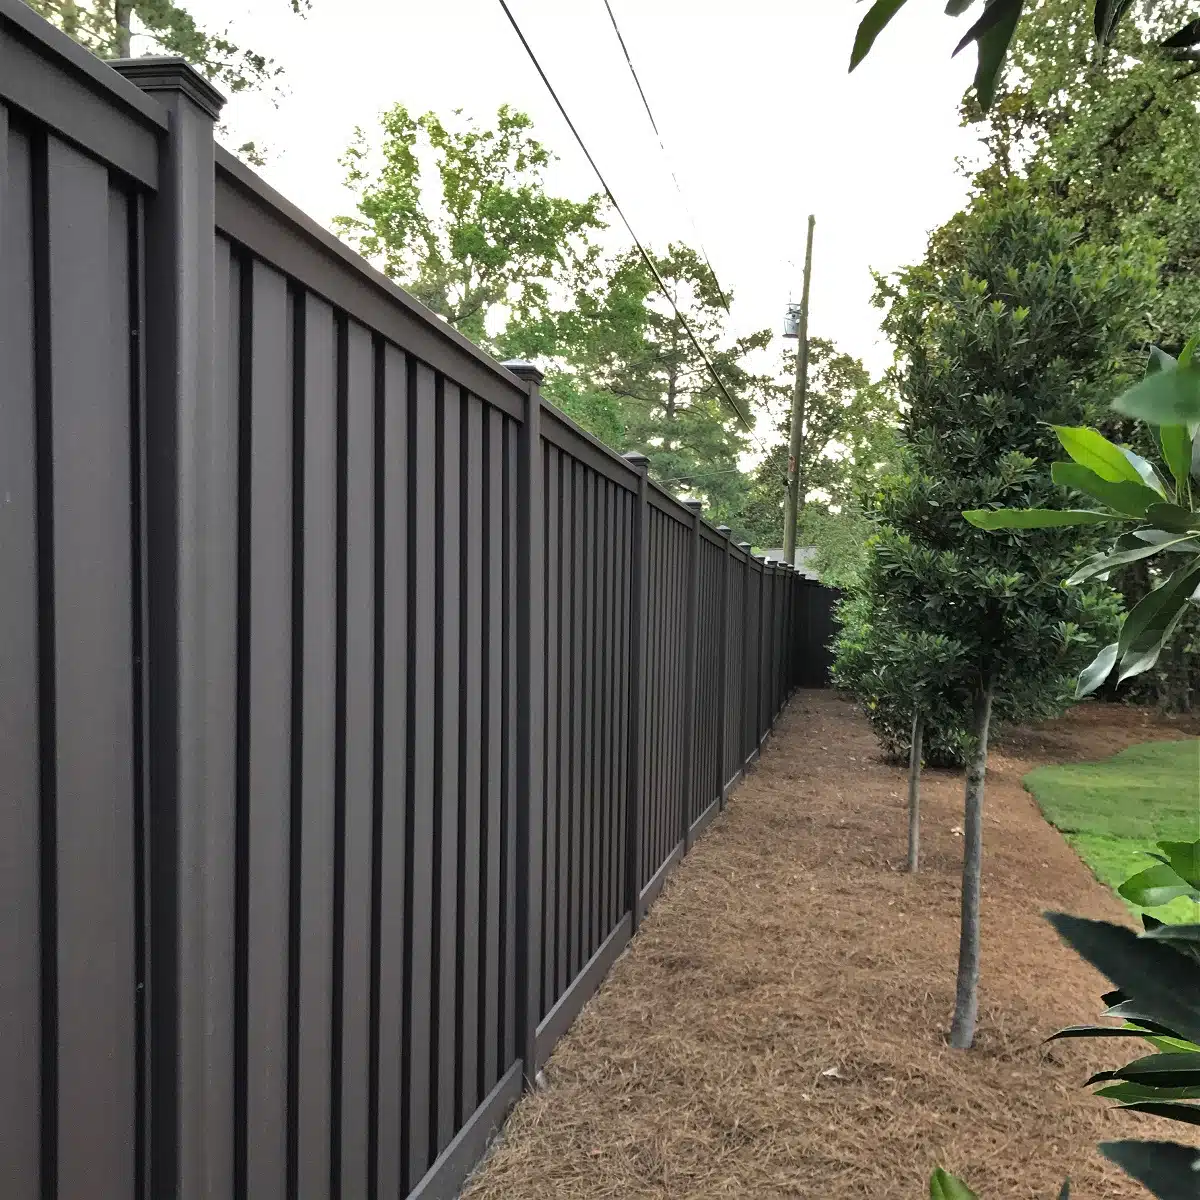 An 8 ft. tall Trex privacy Fence in a South Carolina residence's backyard.